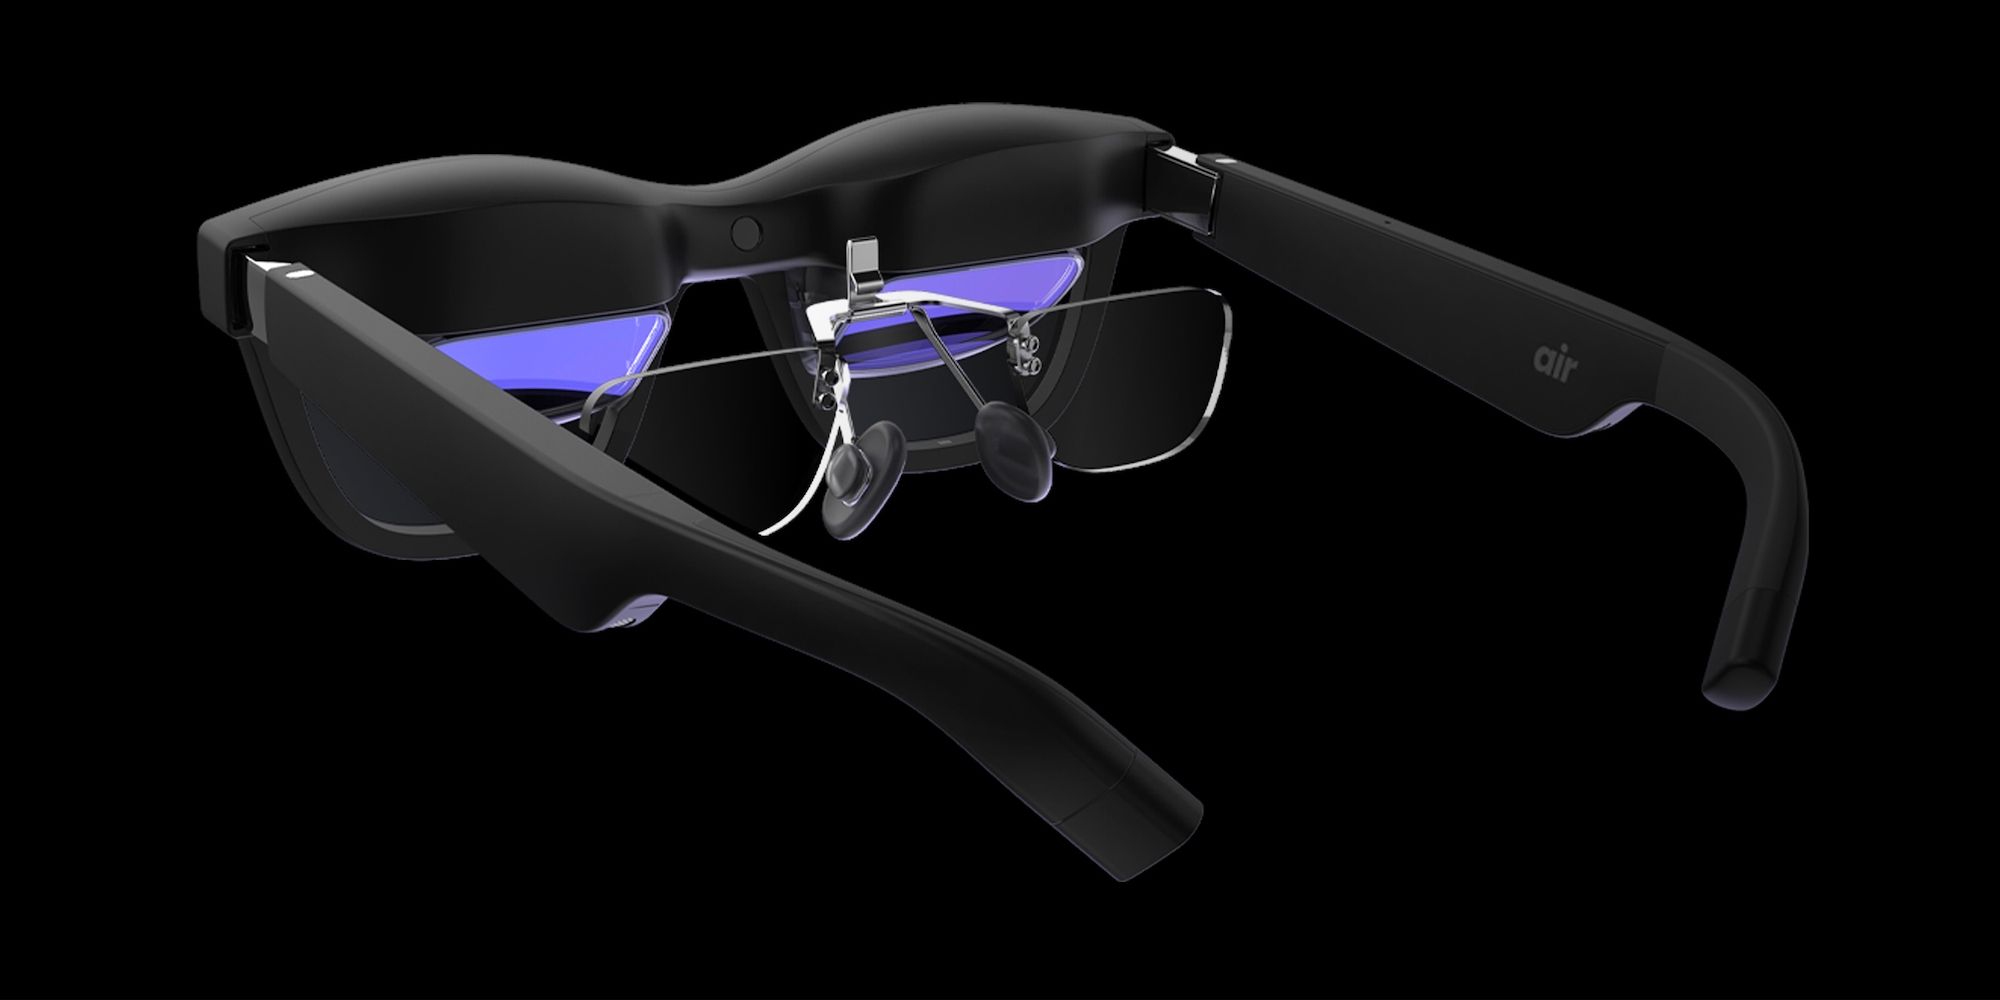 Xreal (Nreal) Air Vs. Xreal Light: Which AR Glasses Should You Buy?